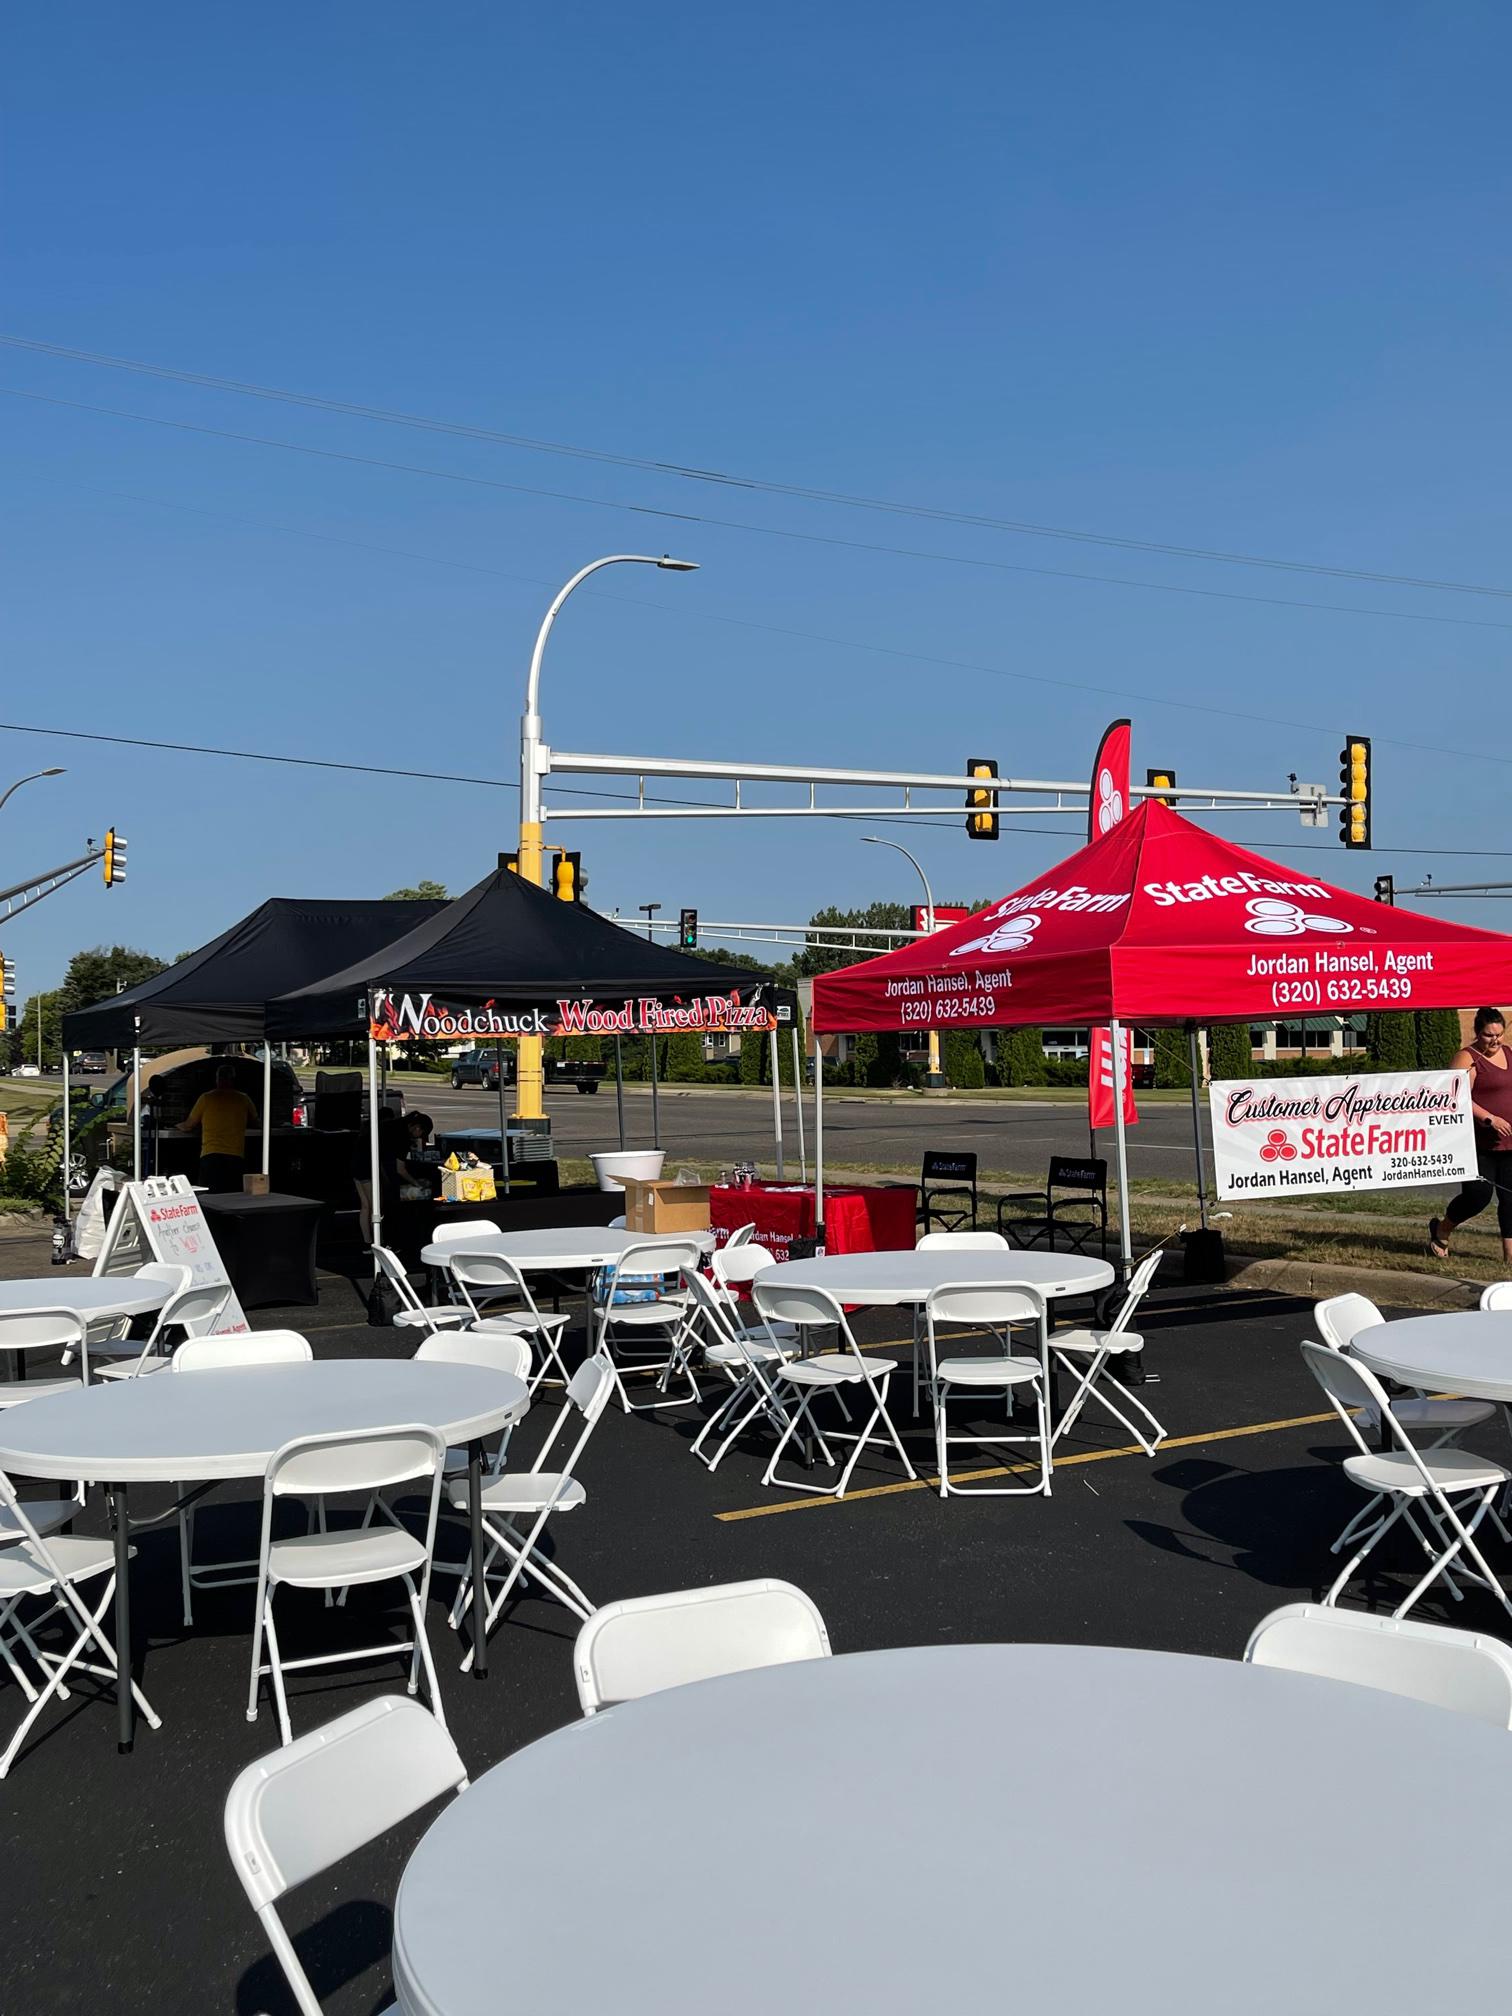 “Our Customer Appreciation event was a success! Huge Thank you to Wood Chuck Wood Fired Pizza for all their hard work!”